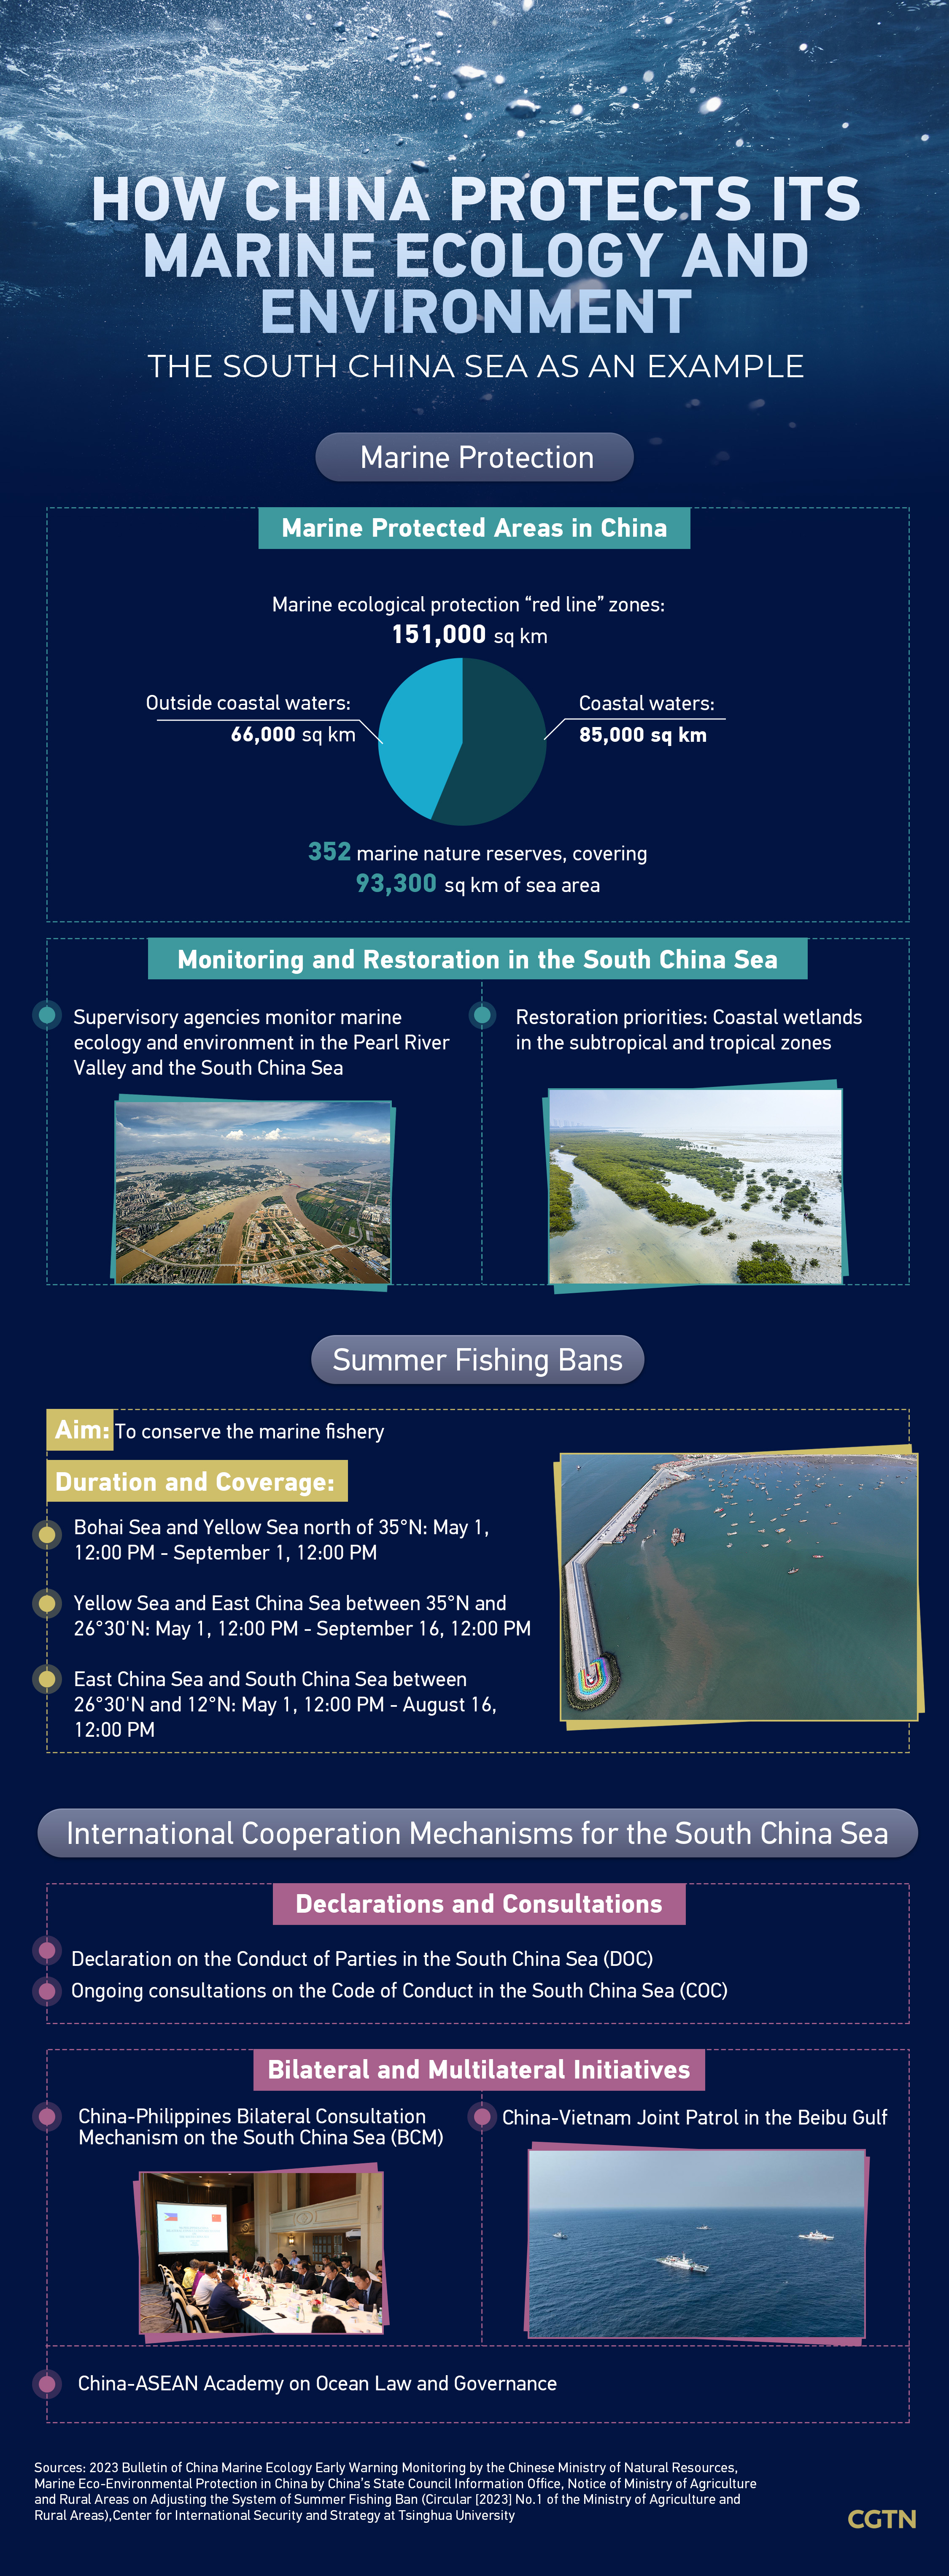 Graphics: How China protects marine eco-environment in South China Sea